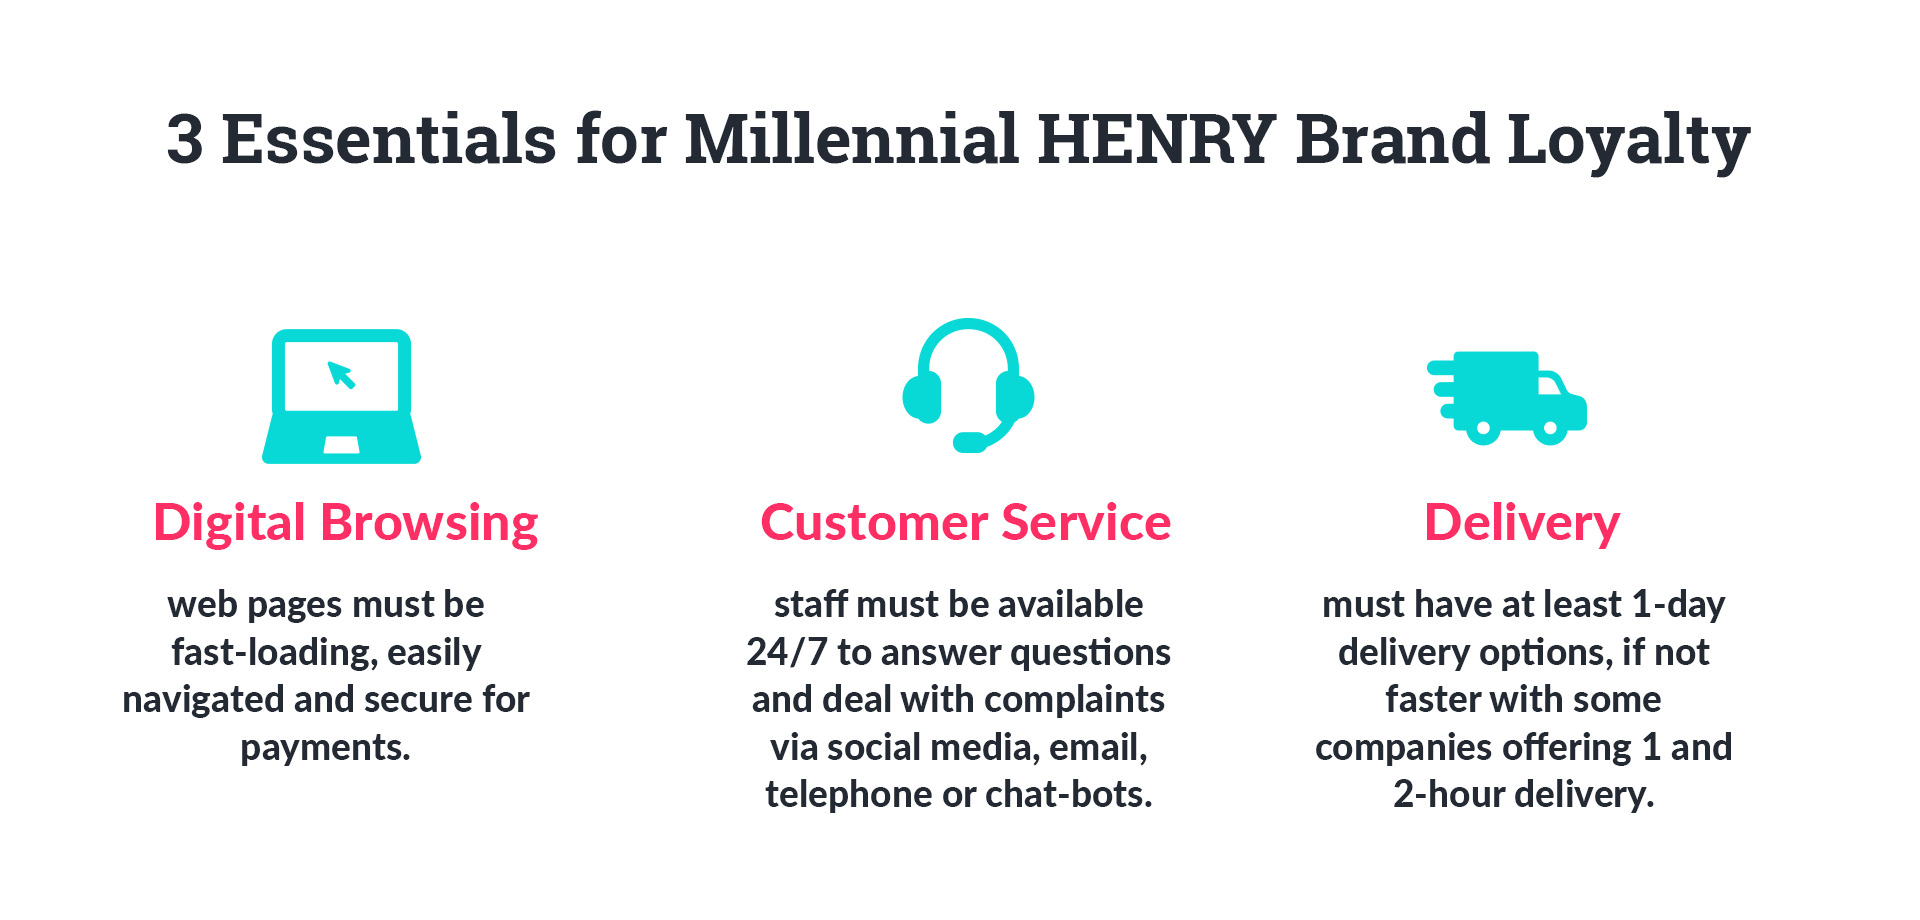 Hurree. 3 Essentials for Millennial HENRY Brand Loyalty: Digital Browsing, Customer Service, Delivery. 